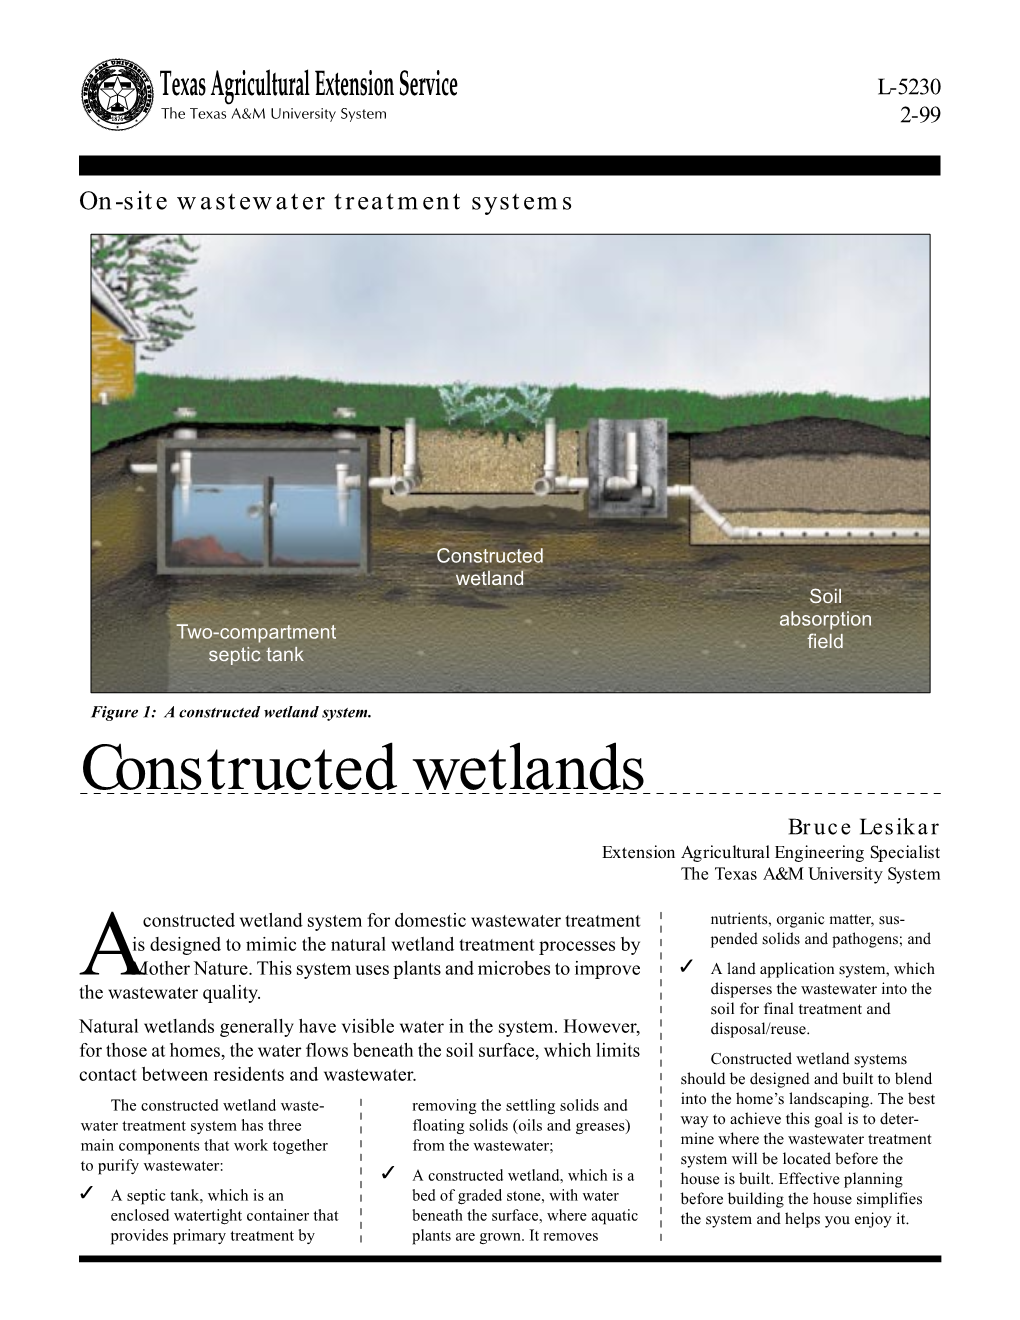 Constructed Wetlands Bruce Lesikar Extension Agricultural Engineering Specialist the Texas A&M University System